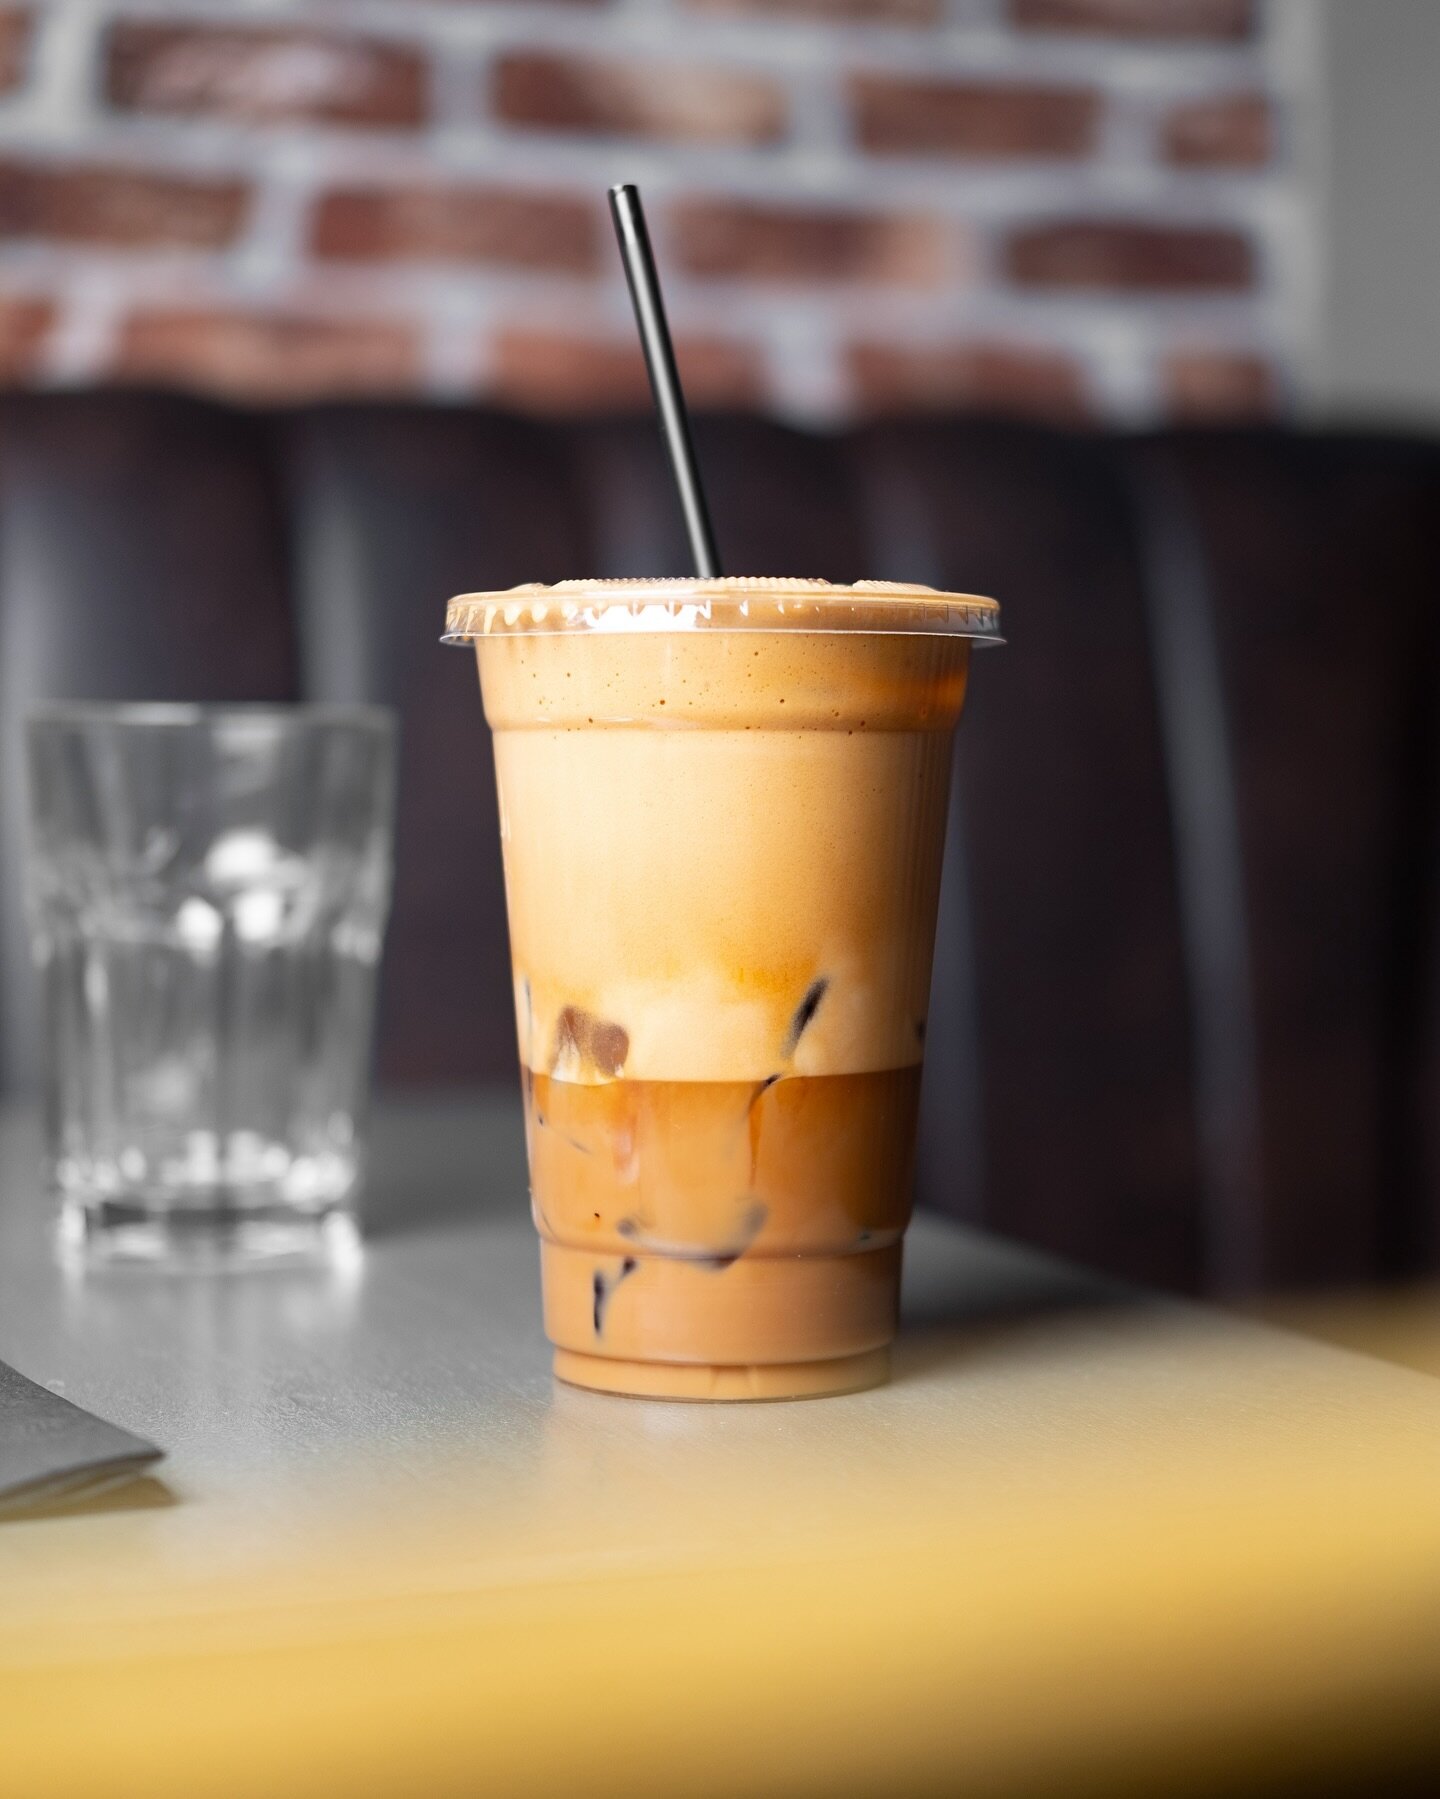 Sip on this, Frappe at The Grand! Made with the finest ingredients and a touch of Greek flair, it&rsquo;s the perfect pick-me-up for any time of day ✨

🍽️ Tap the link in our bio for reservation &amp; more!

📍The Grand
37-01 30th Avenue
📞 (718) 80